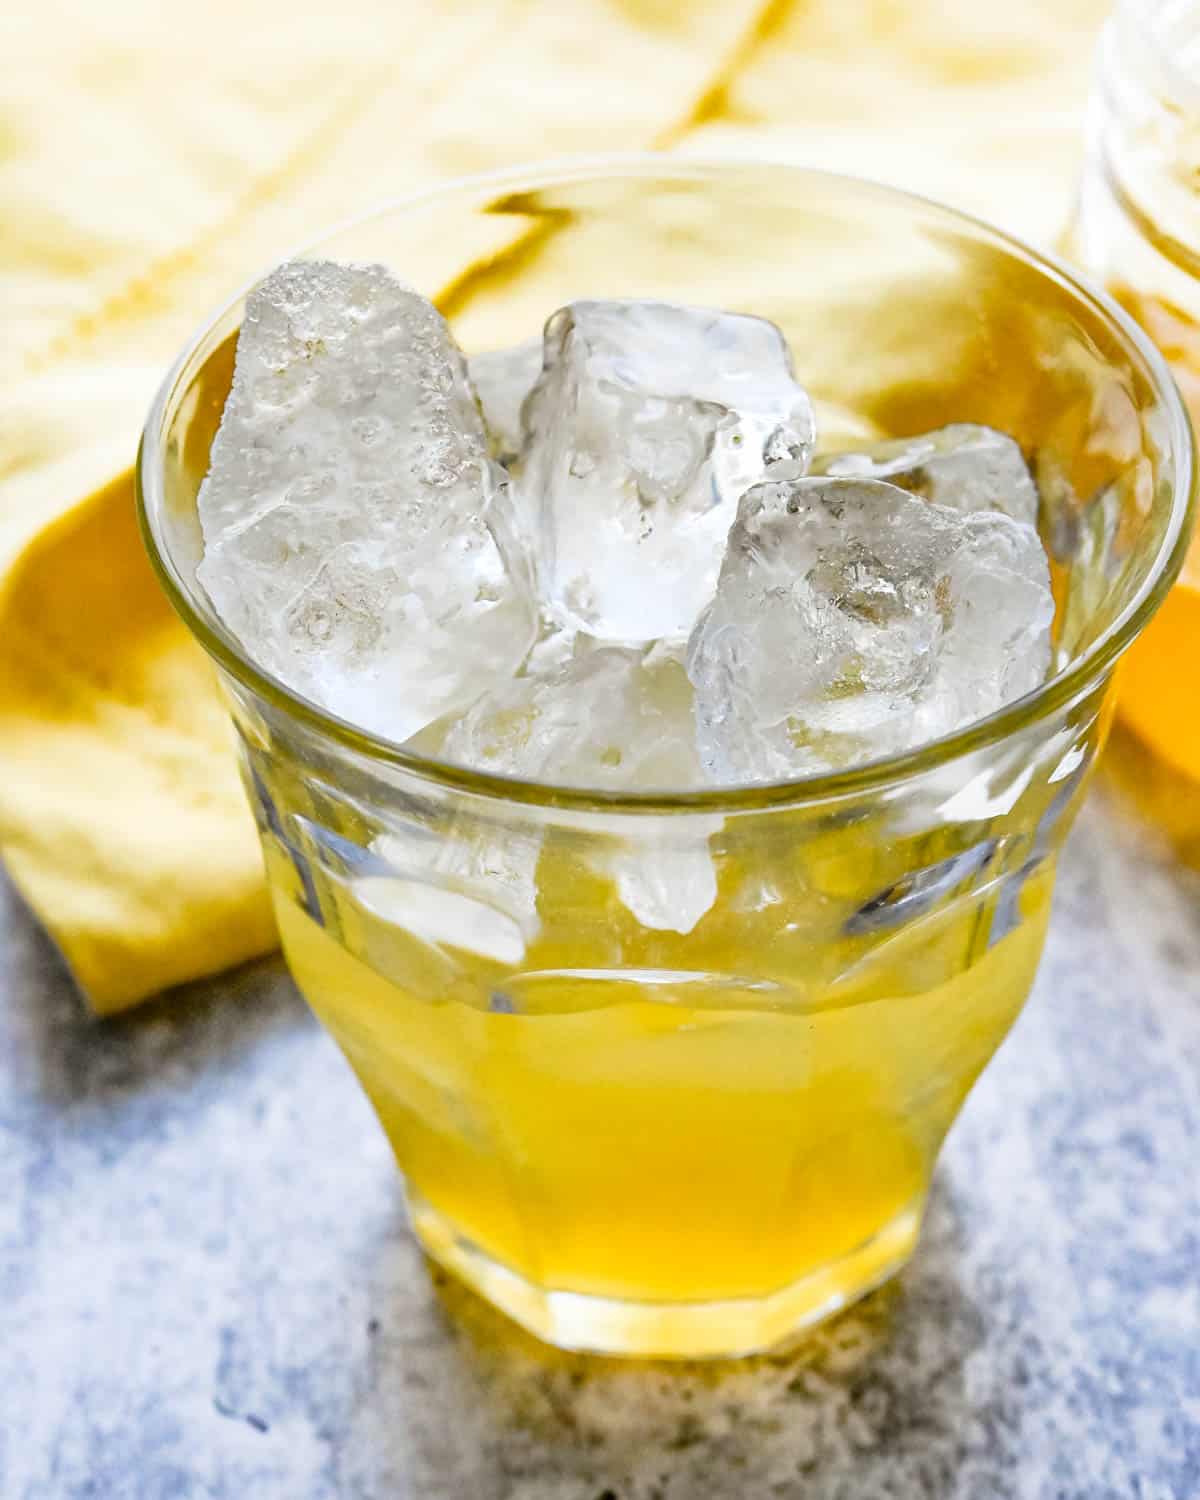 Adding passion fruit syrup and lemon juice to an ice-filled glass.